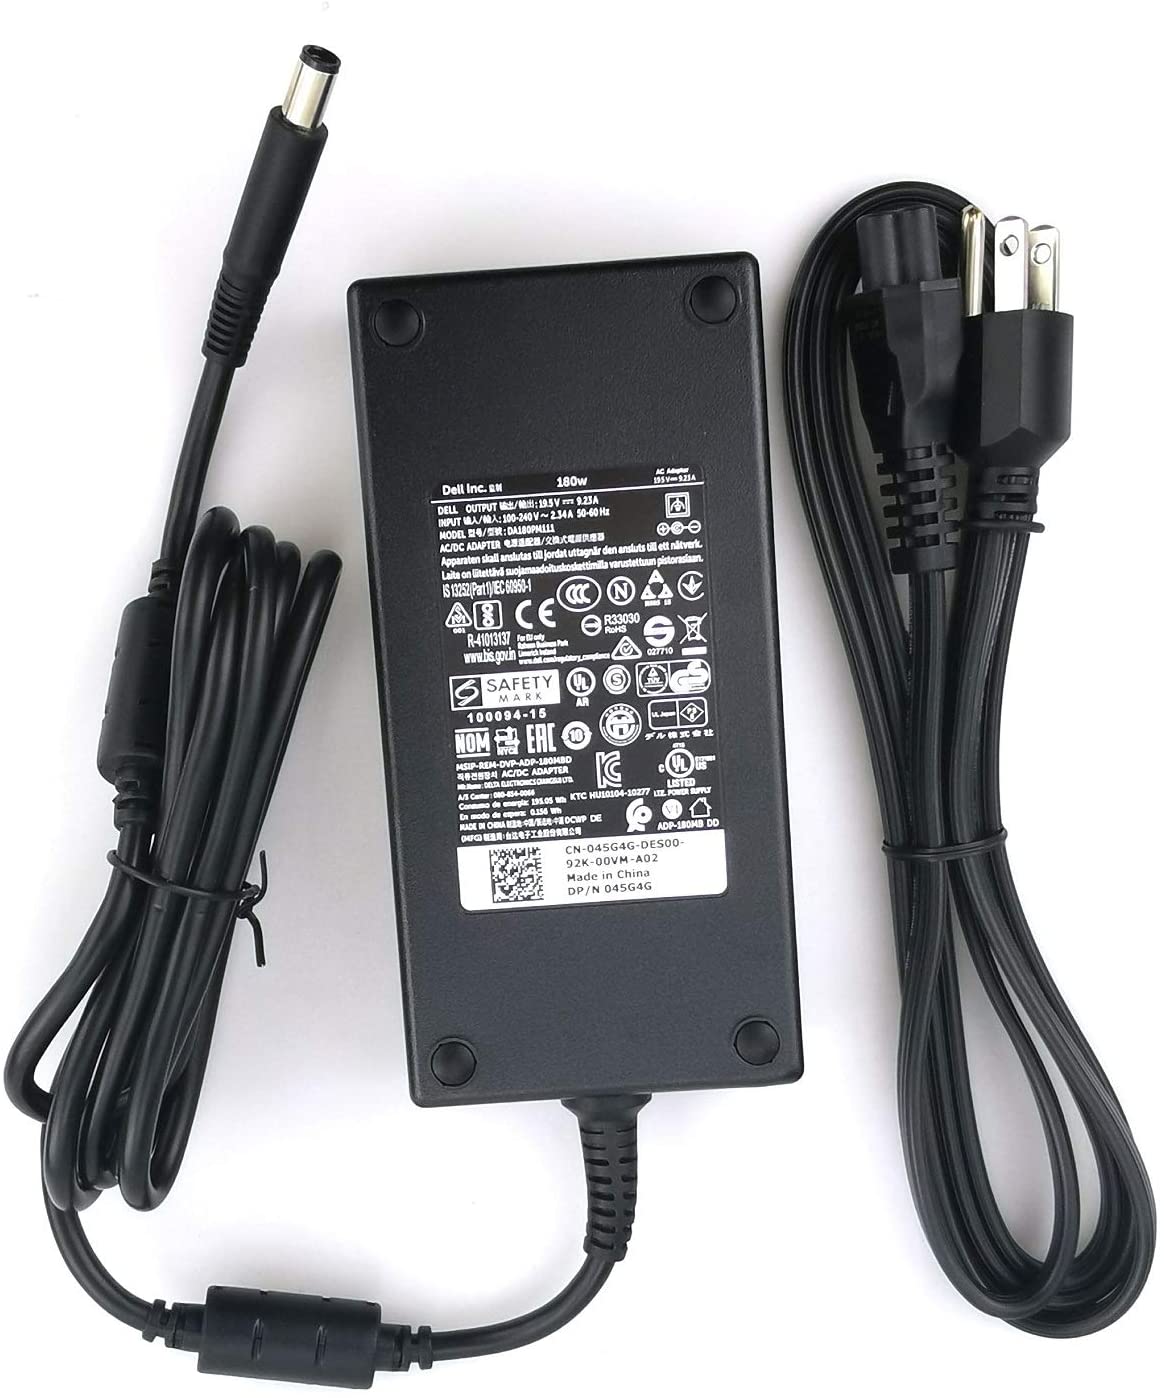 Dell Inspiron 2350 180W Charger AC Power Adapter Cord